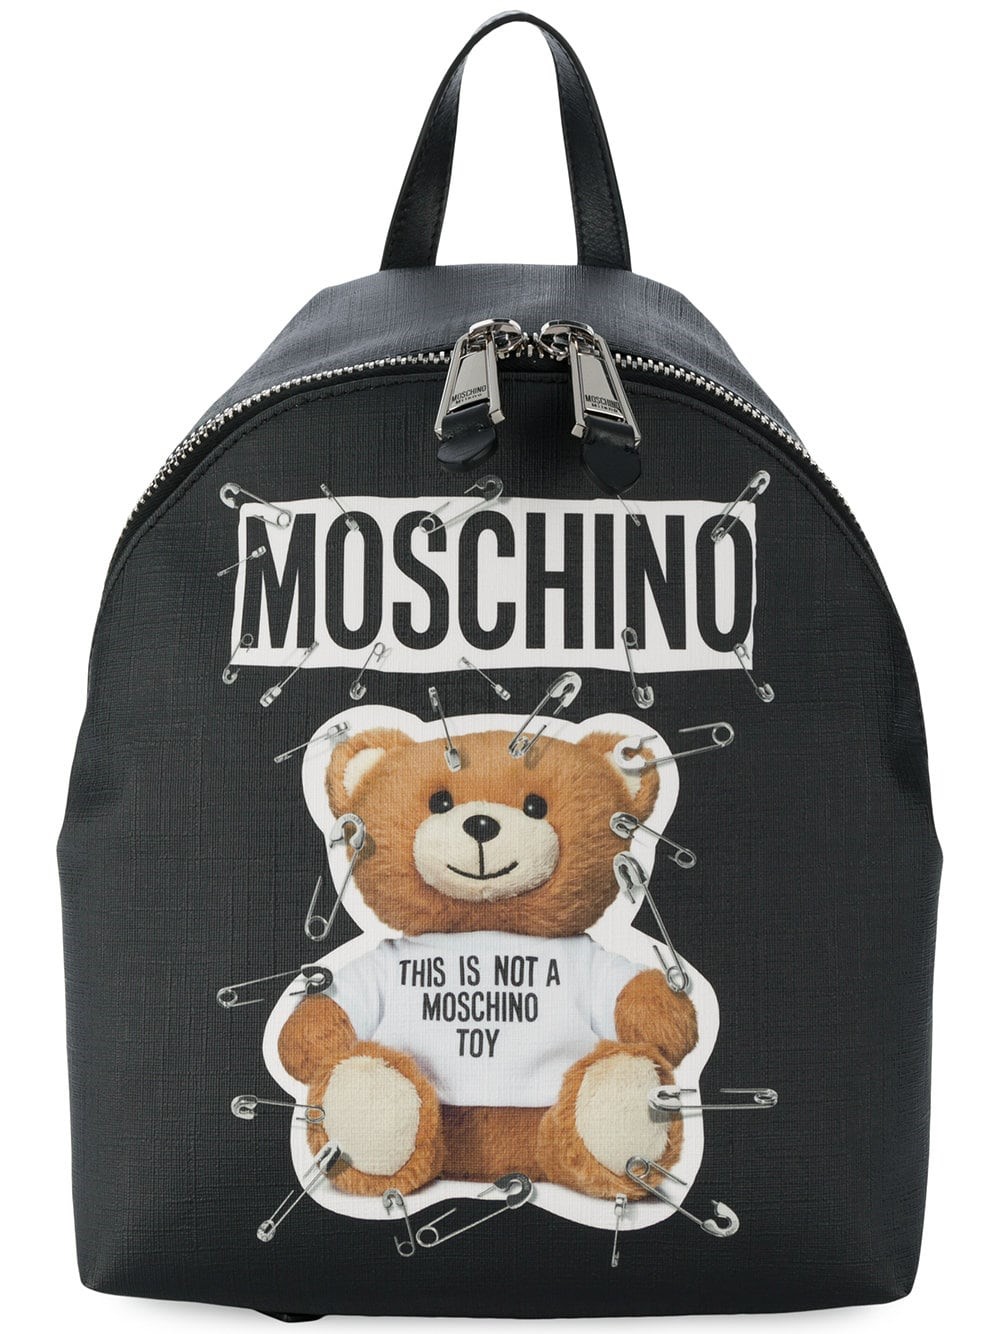 moschino TEDDY BEAR BACKPACK available on montiboutique.com - 23995